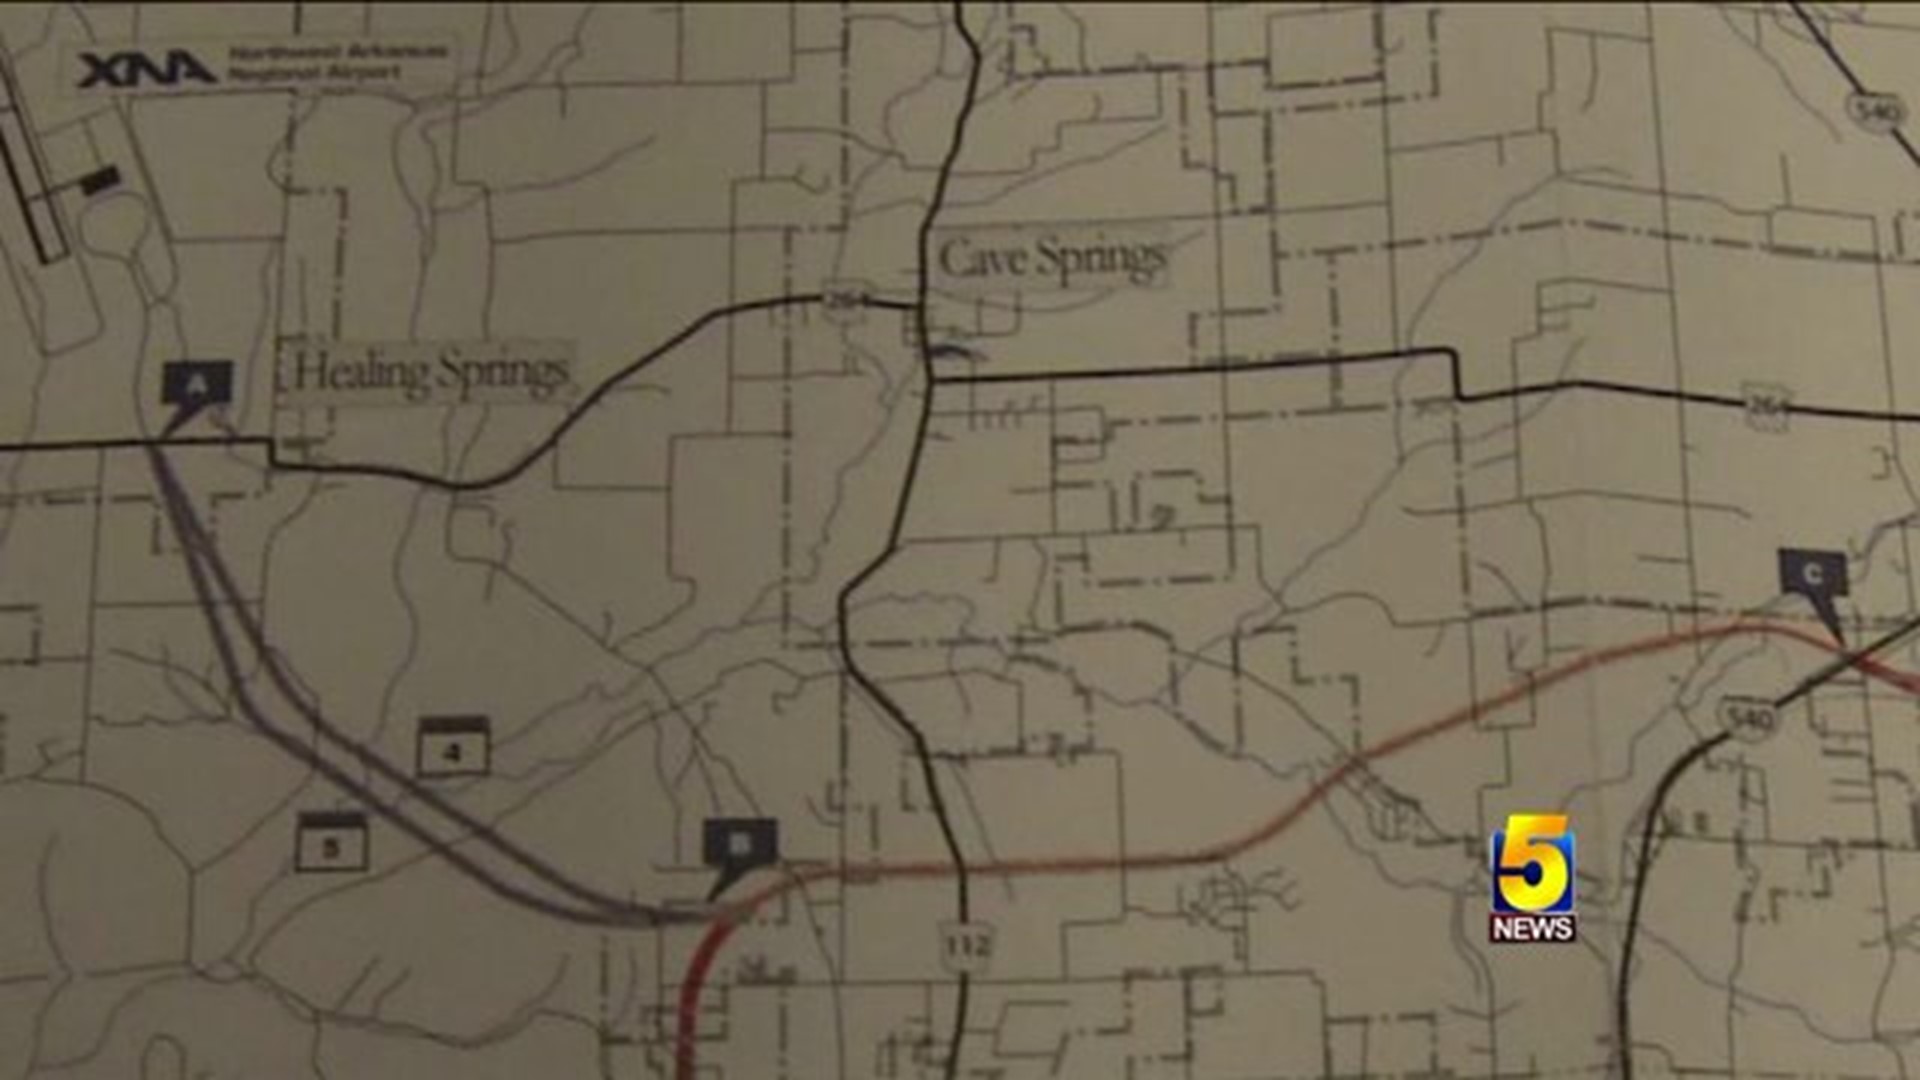 New Highway Planned To XNA